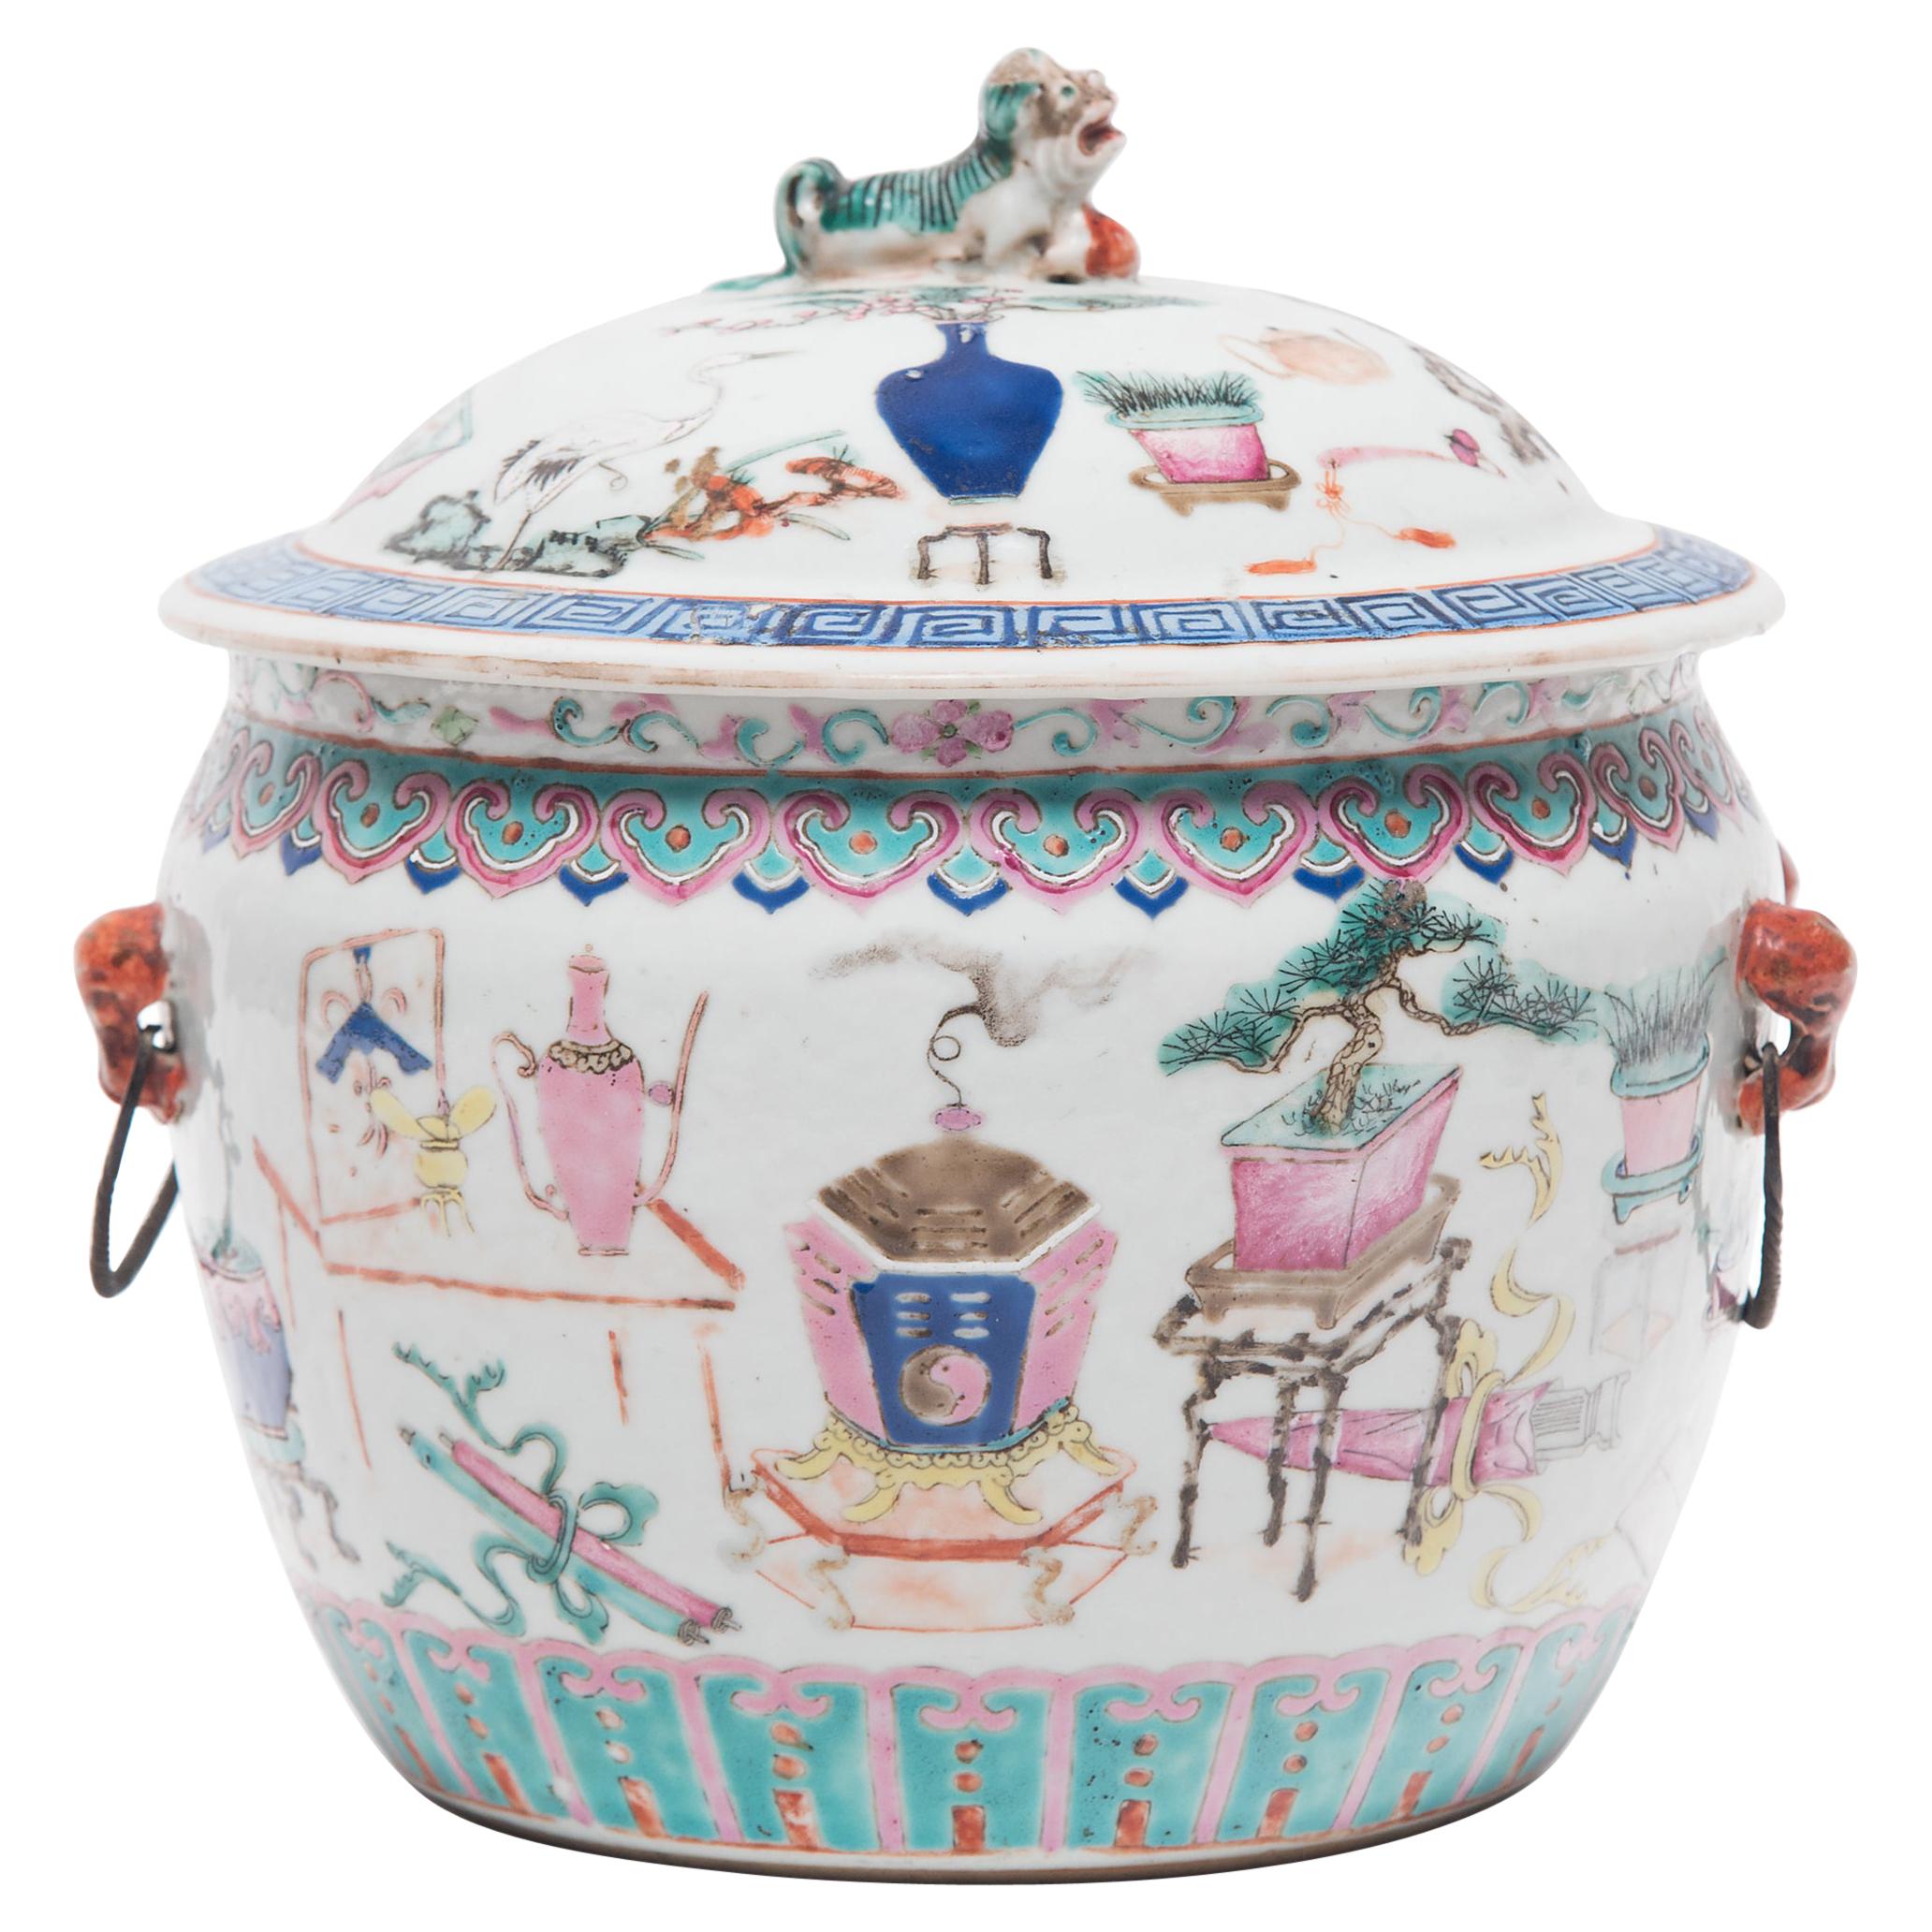 Chinese Famille Rose Soup Tureen with Scholars' Objects, c. 1900